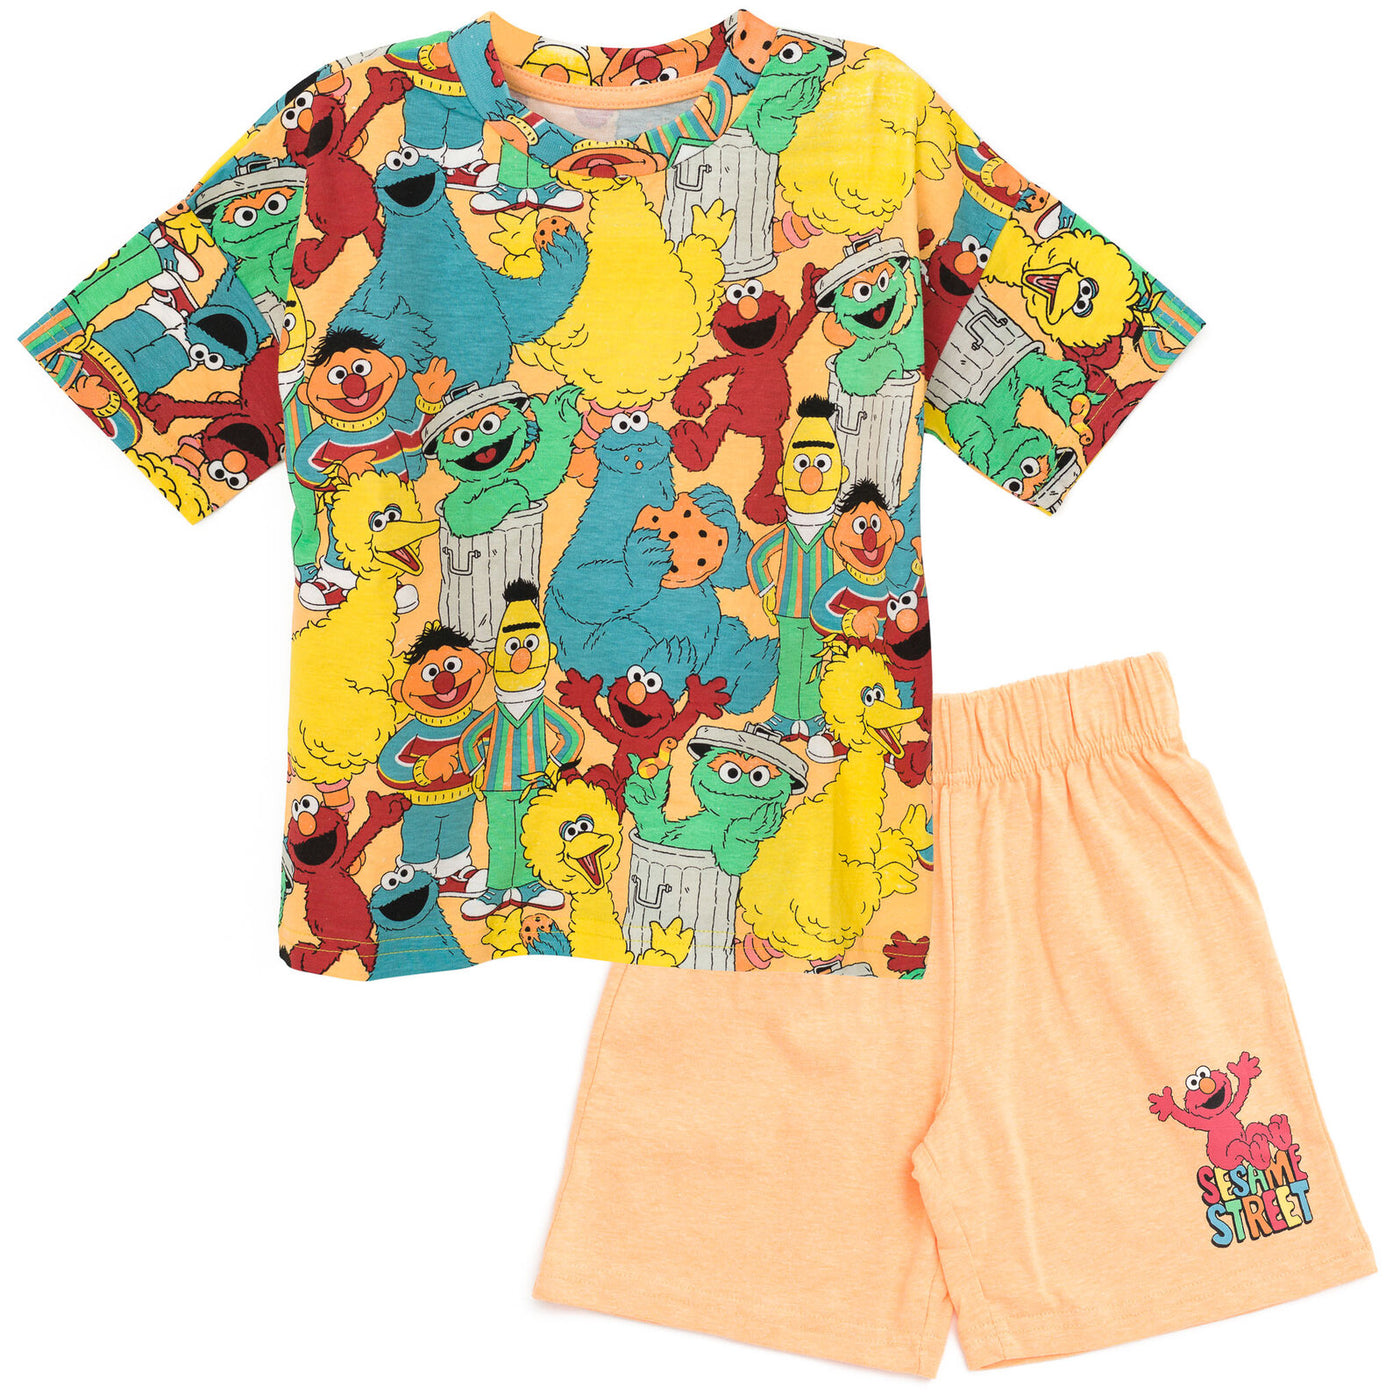 Sesame Street Oscar the Grouch Elmo Bert and Ernie Graphic T-Shirt and Shorts Outfit Set Infant to Little Kid